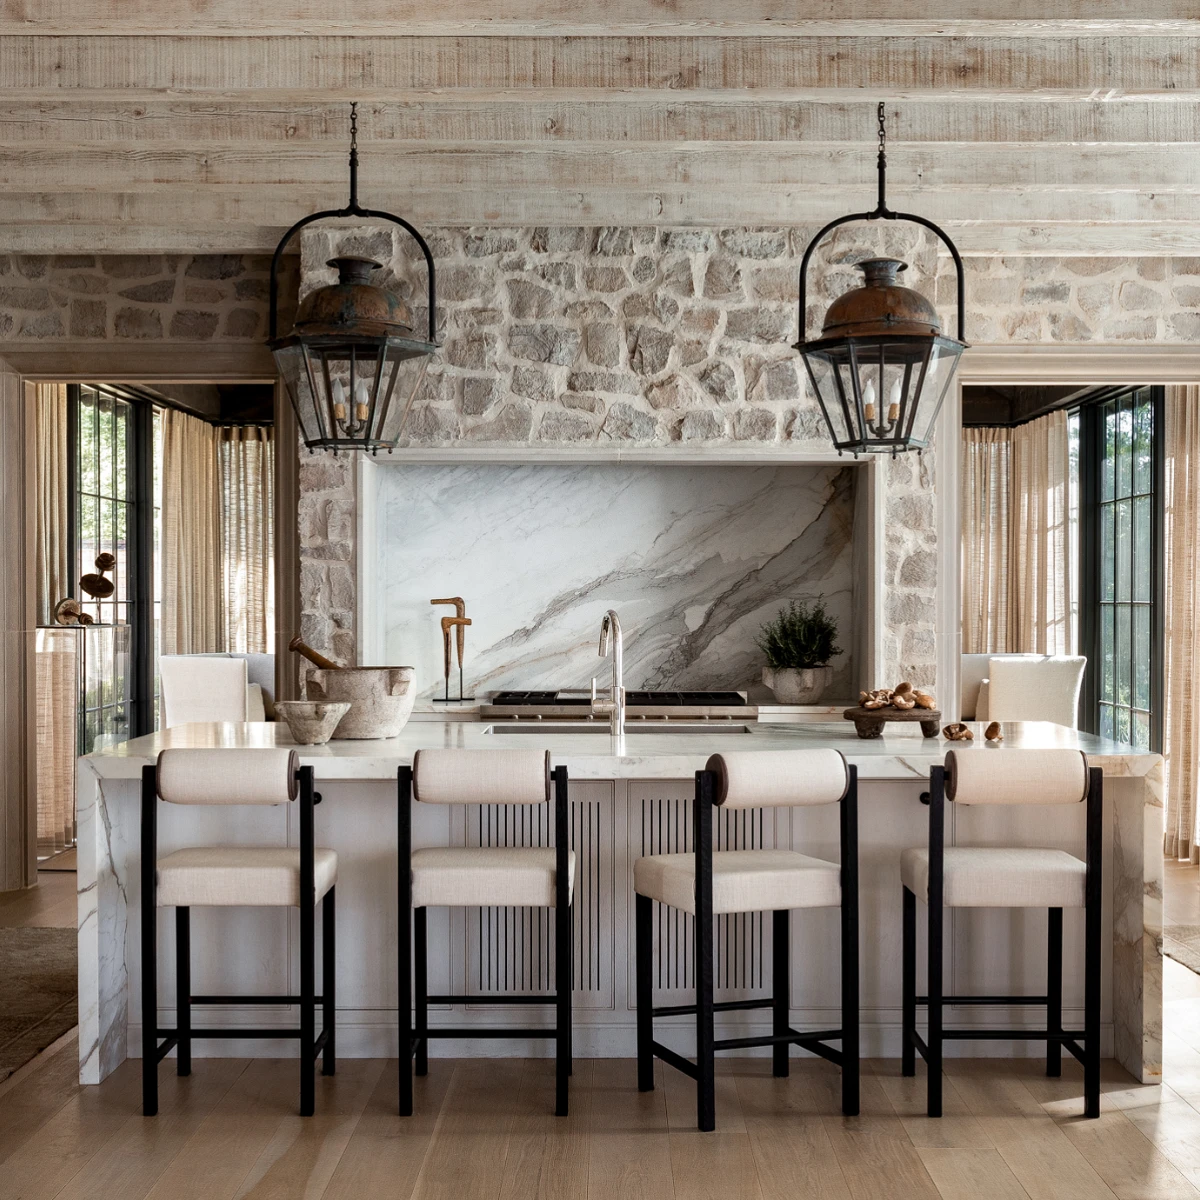 kitchen with rock wall surrounding stove and wood beams and large lanterns as pendants over island